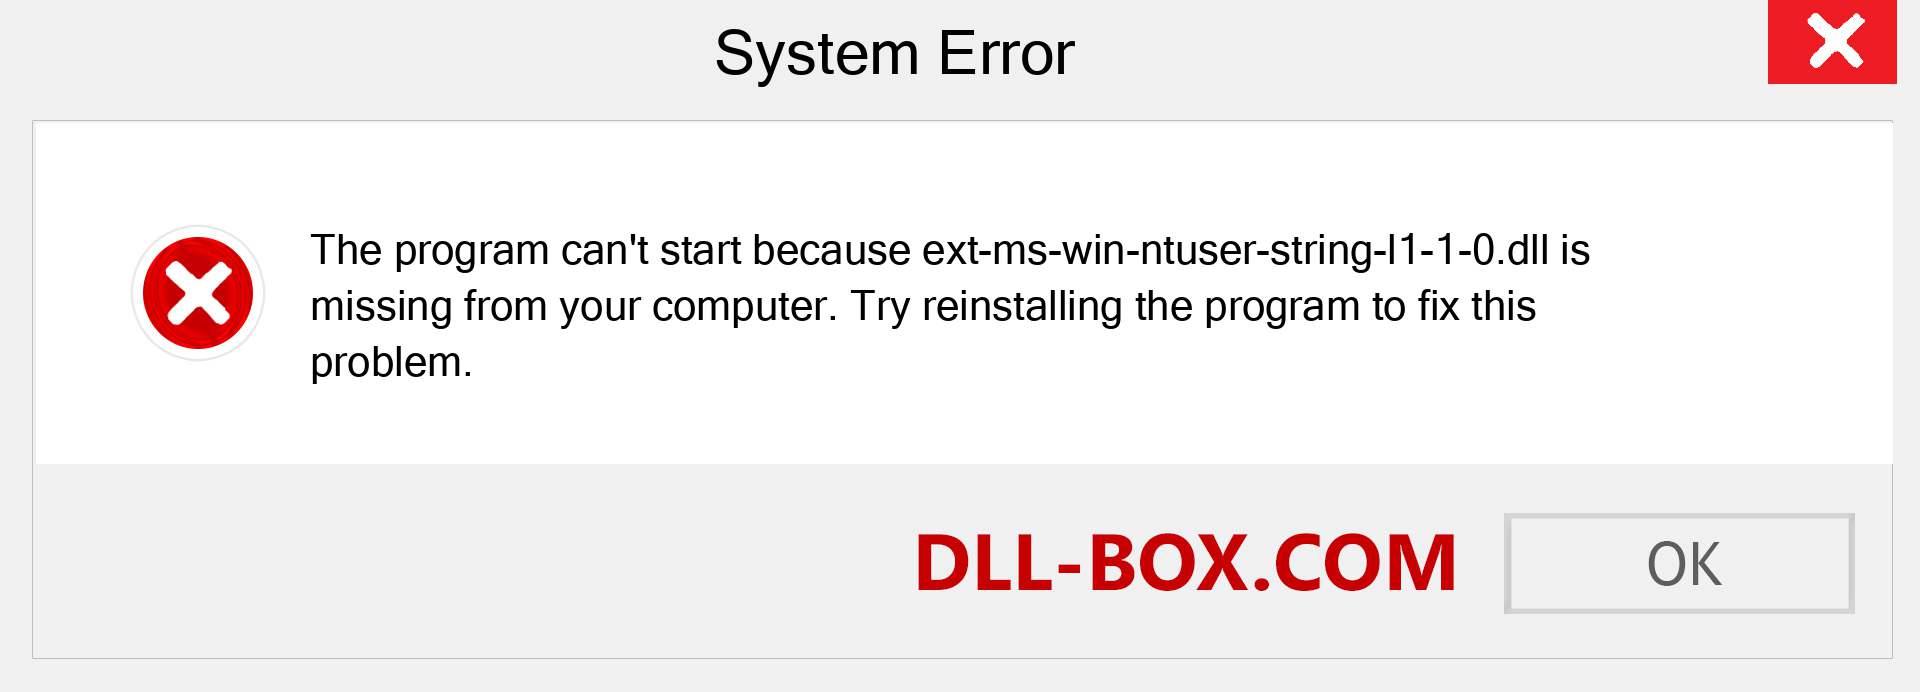  ext-ms-win-ntuser-string-l1-1-0.dll file is missing?. Download for Windows 7, 8, 10 - Fix  ext-ms-win-ntuser-string-l1-1-0 dll Missing Error on Windows, photos, images